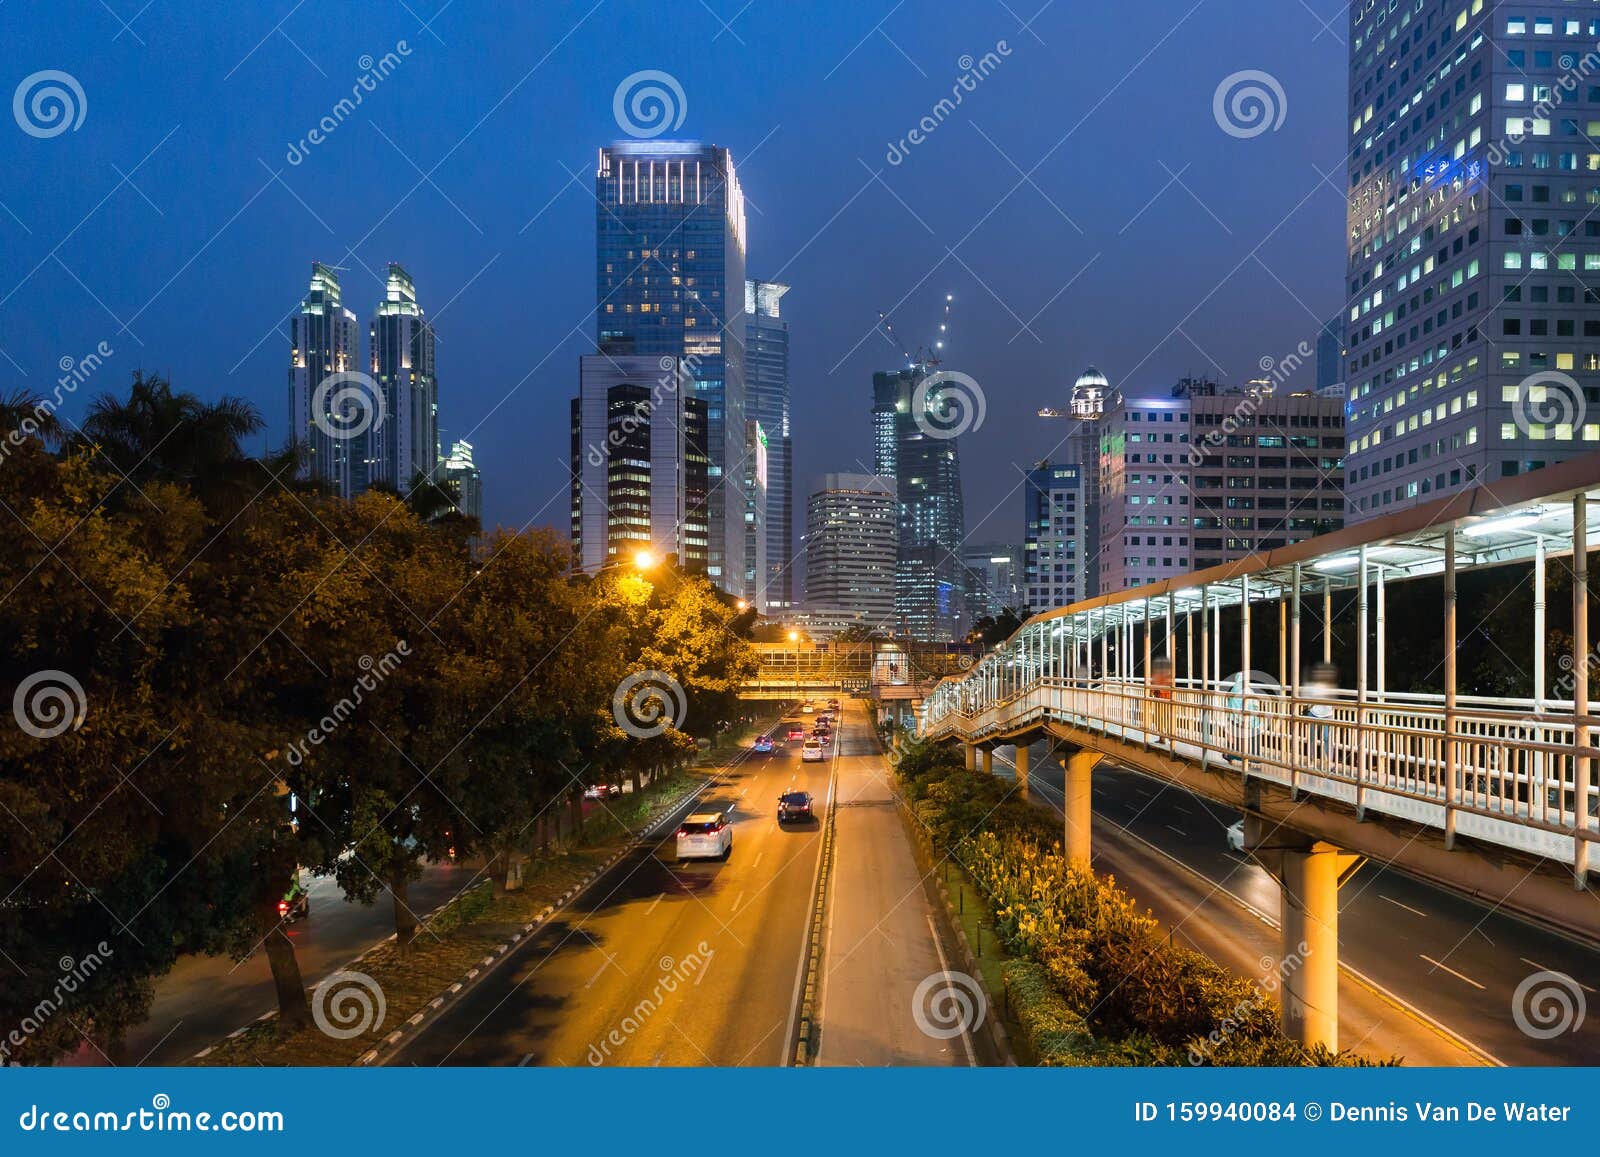 Downtown Jakarta at night stock photo. Image of indonesia - 159940084